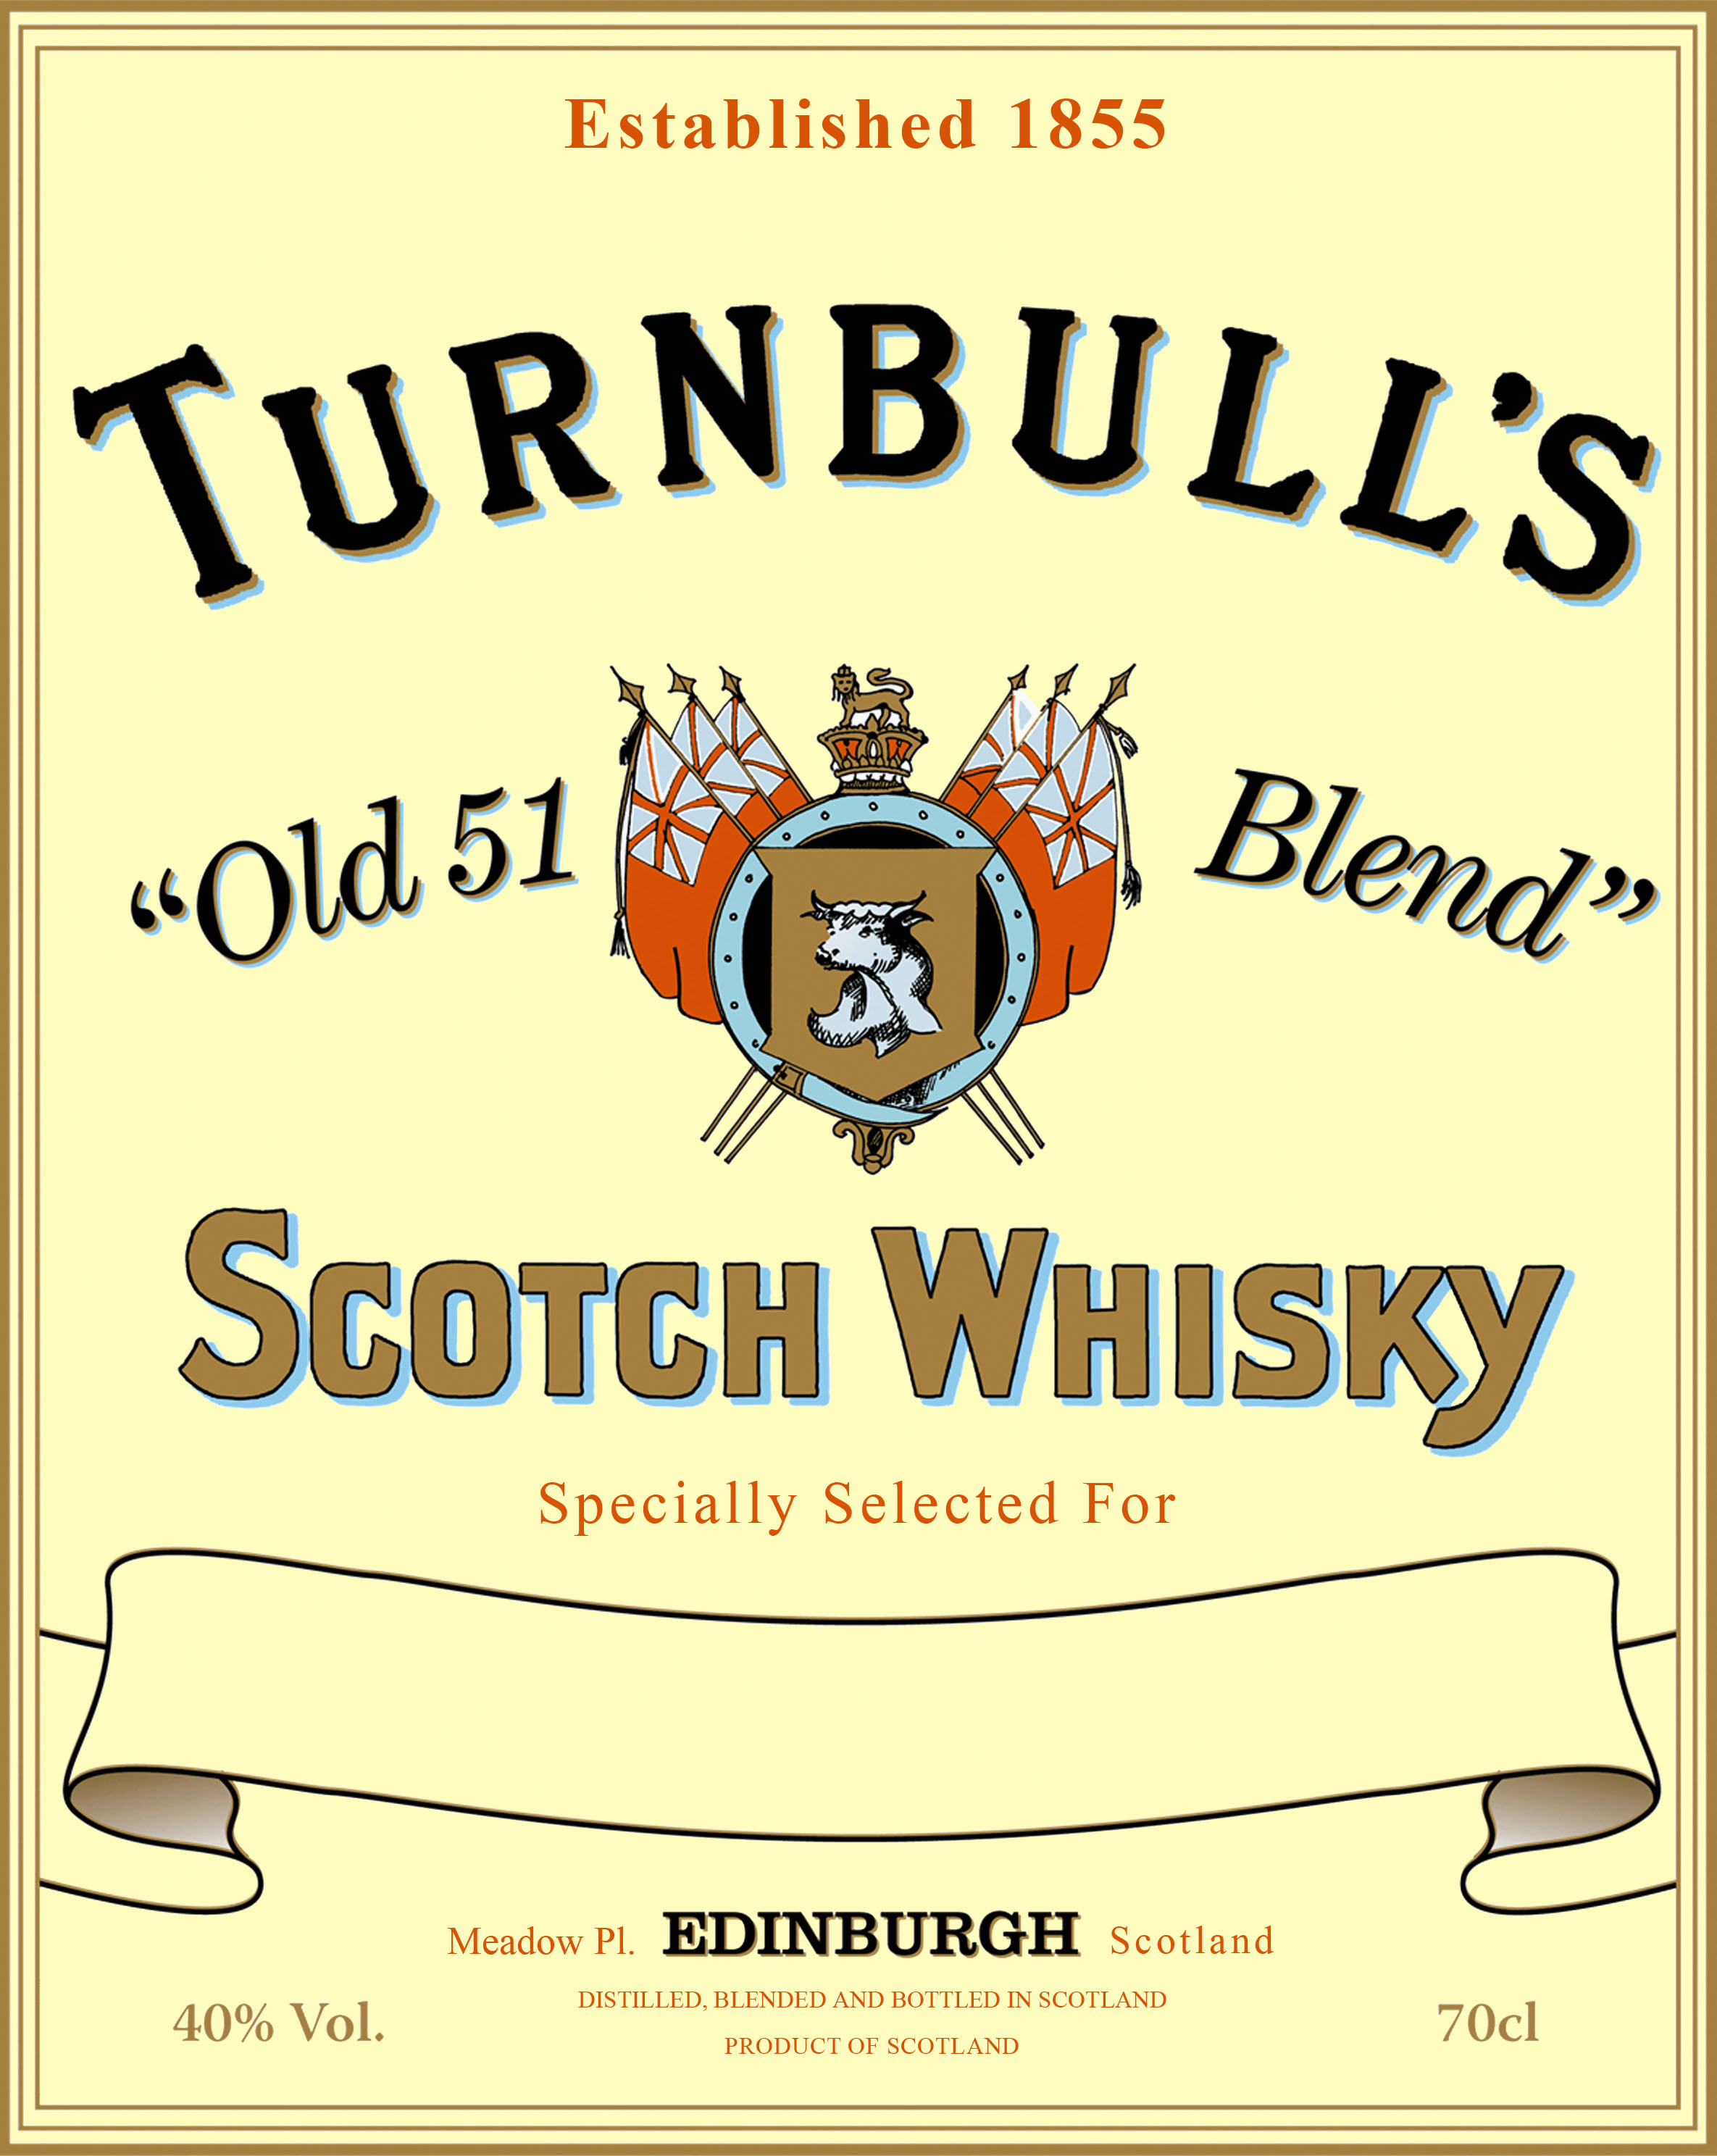 Turnbull’s Old 51 Blend Scotch Whisky Label